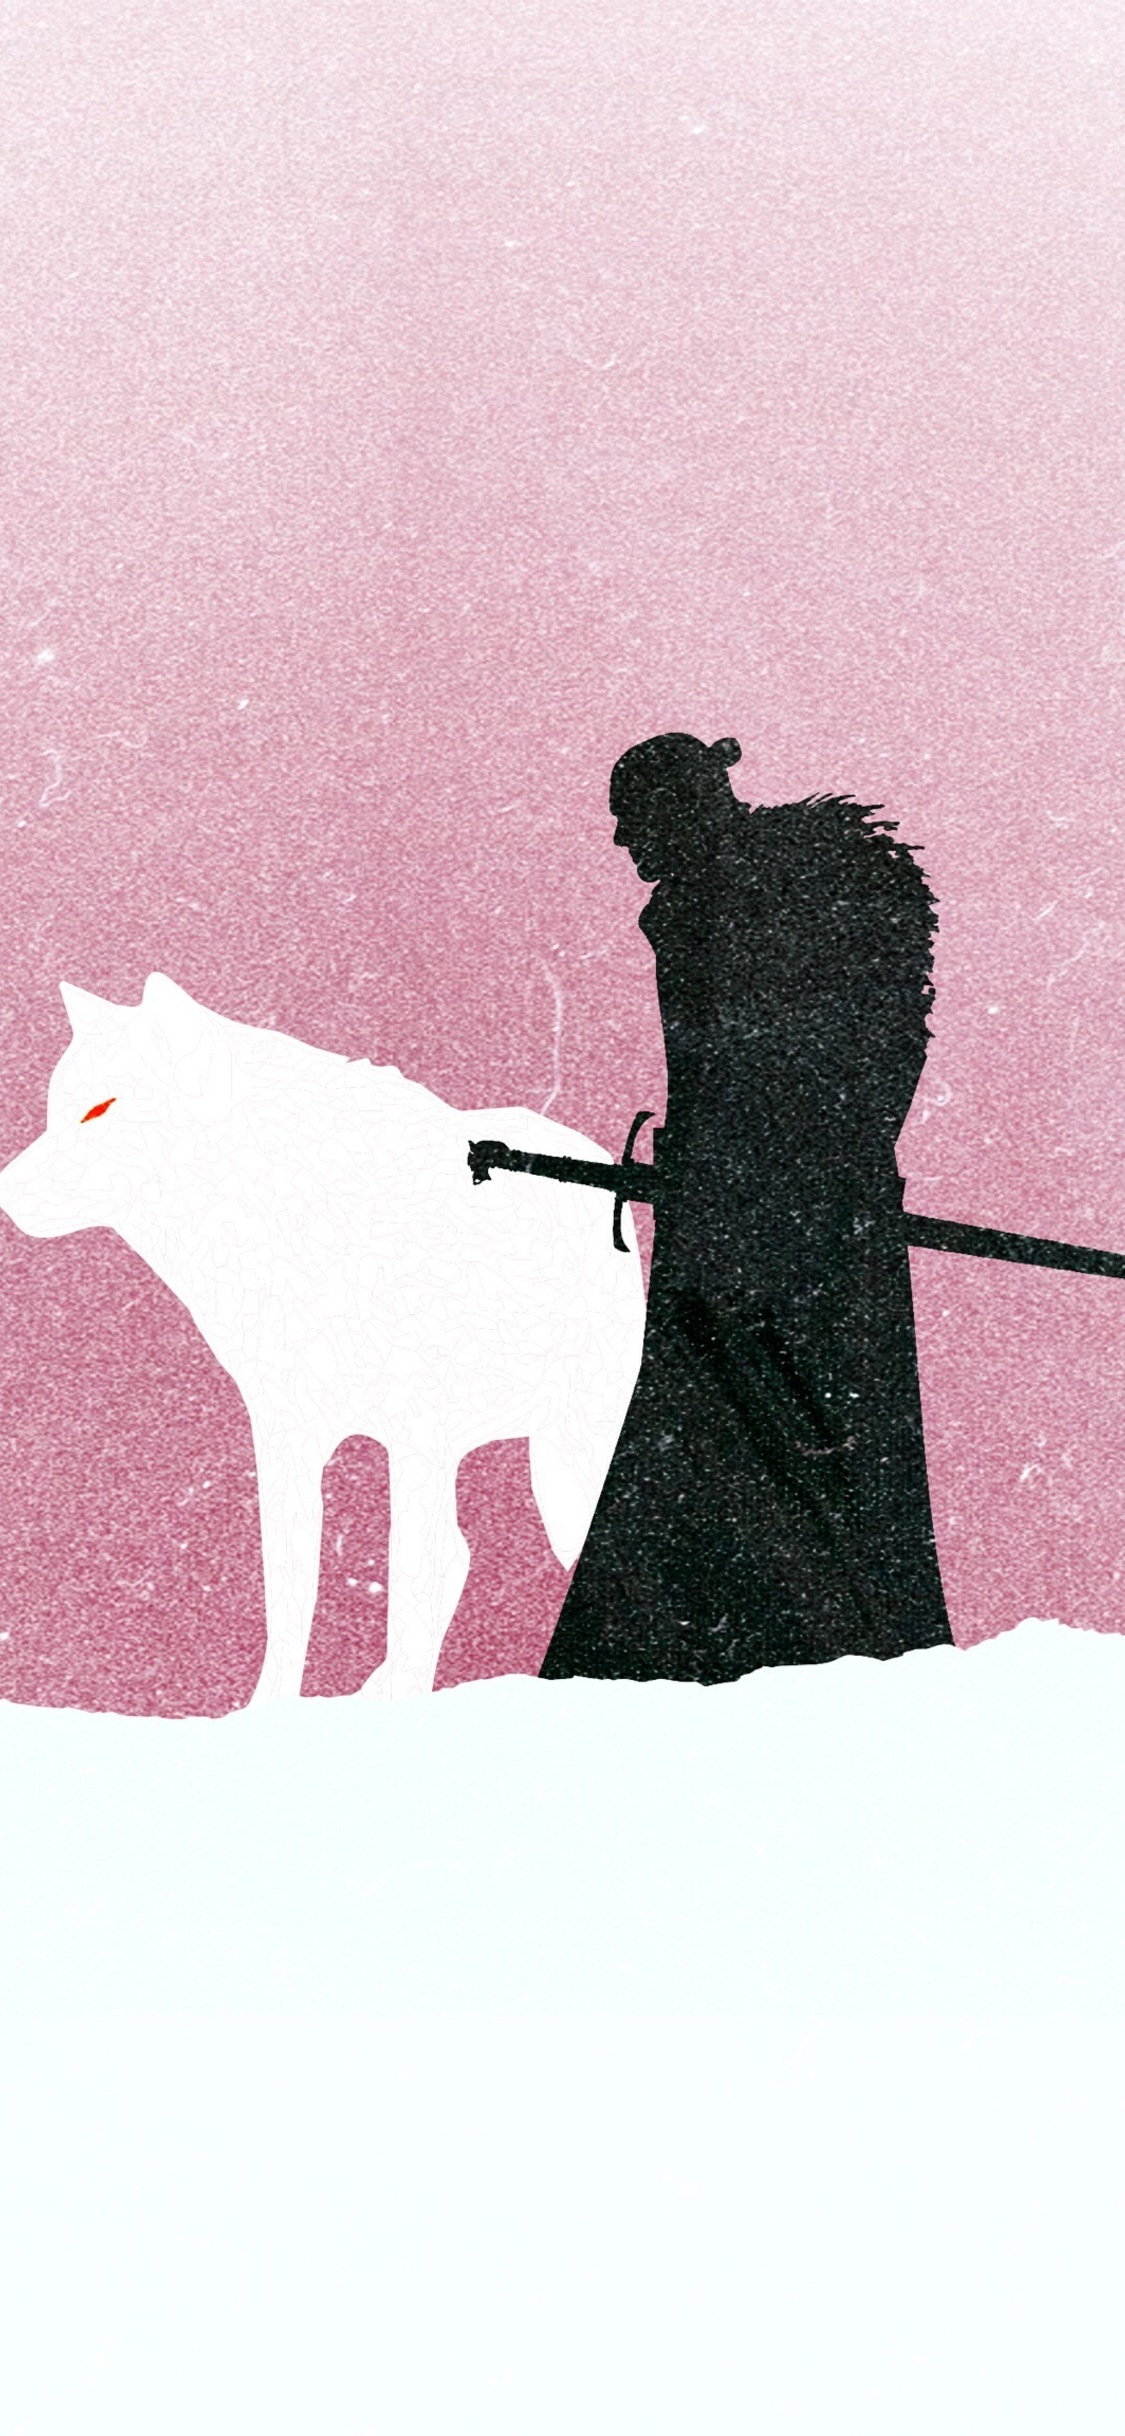 Best Game Of Thrones Wallpapers For Iphone